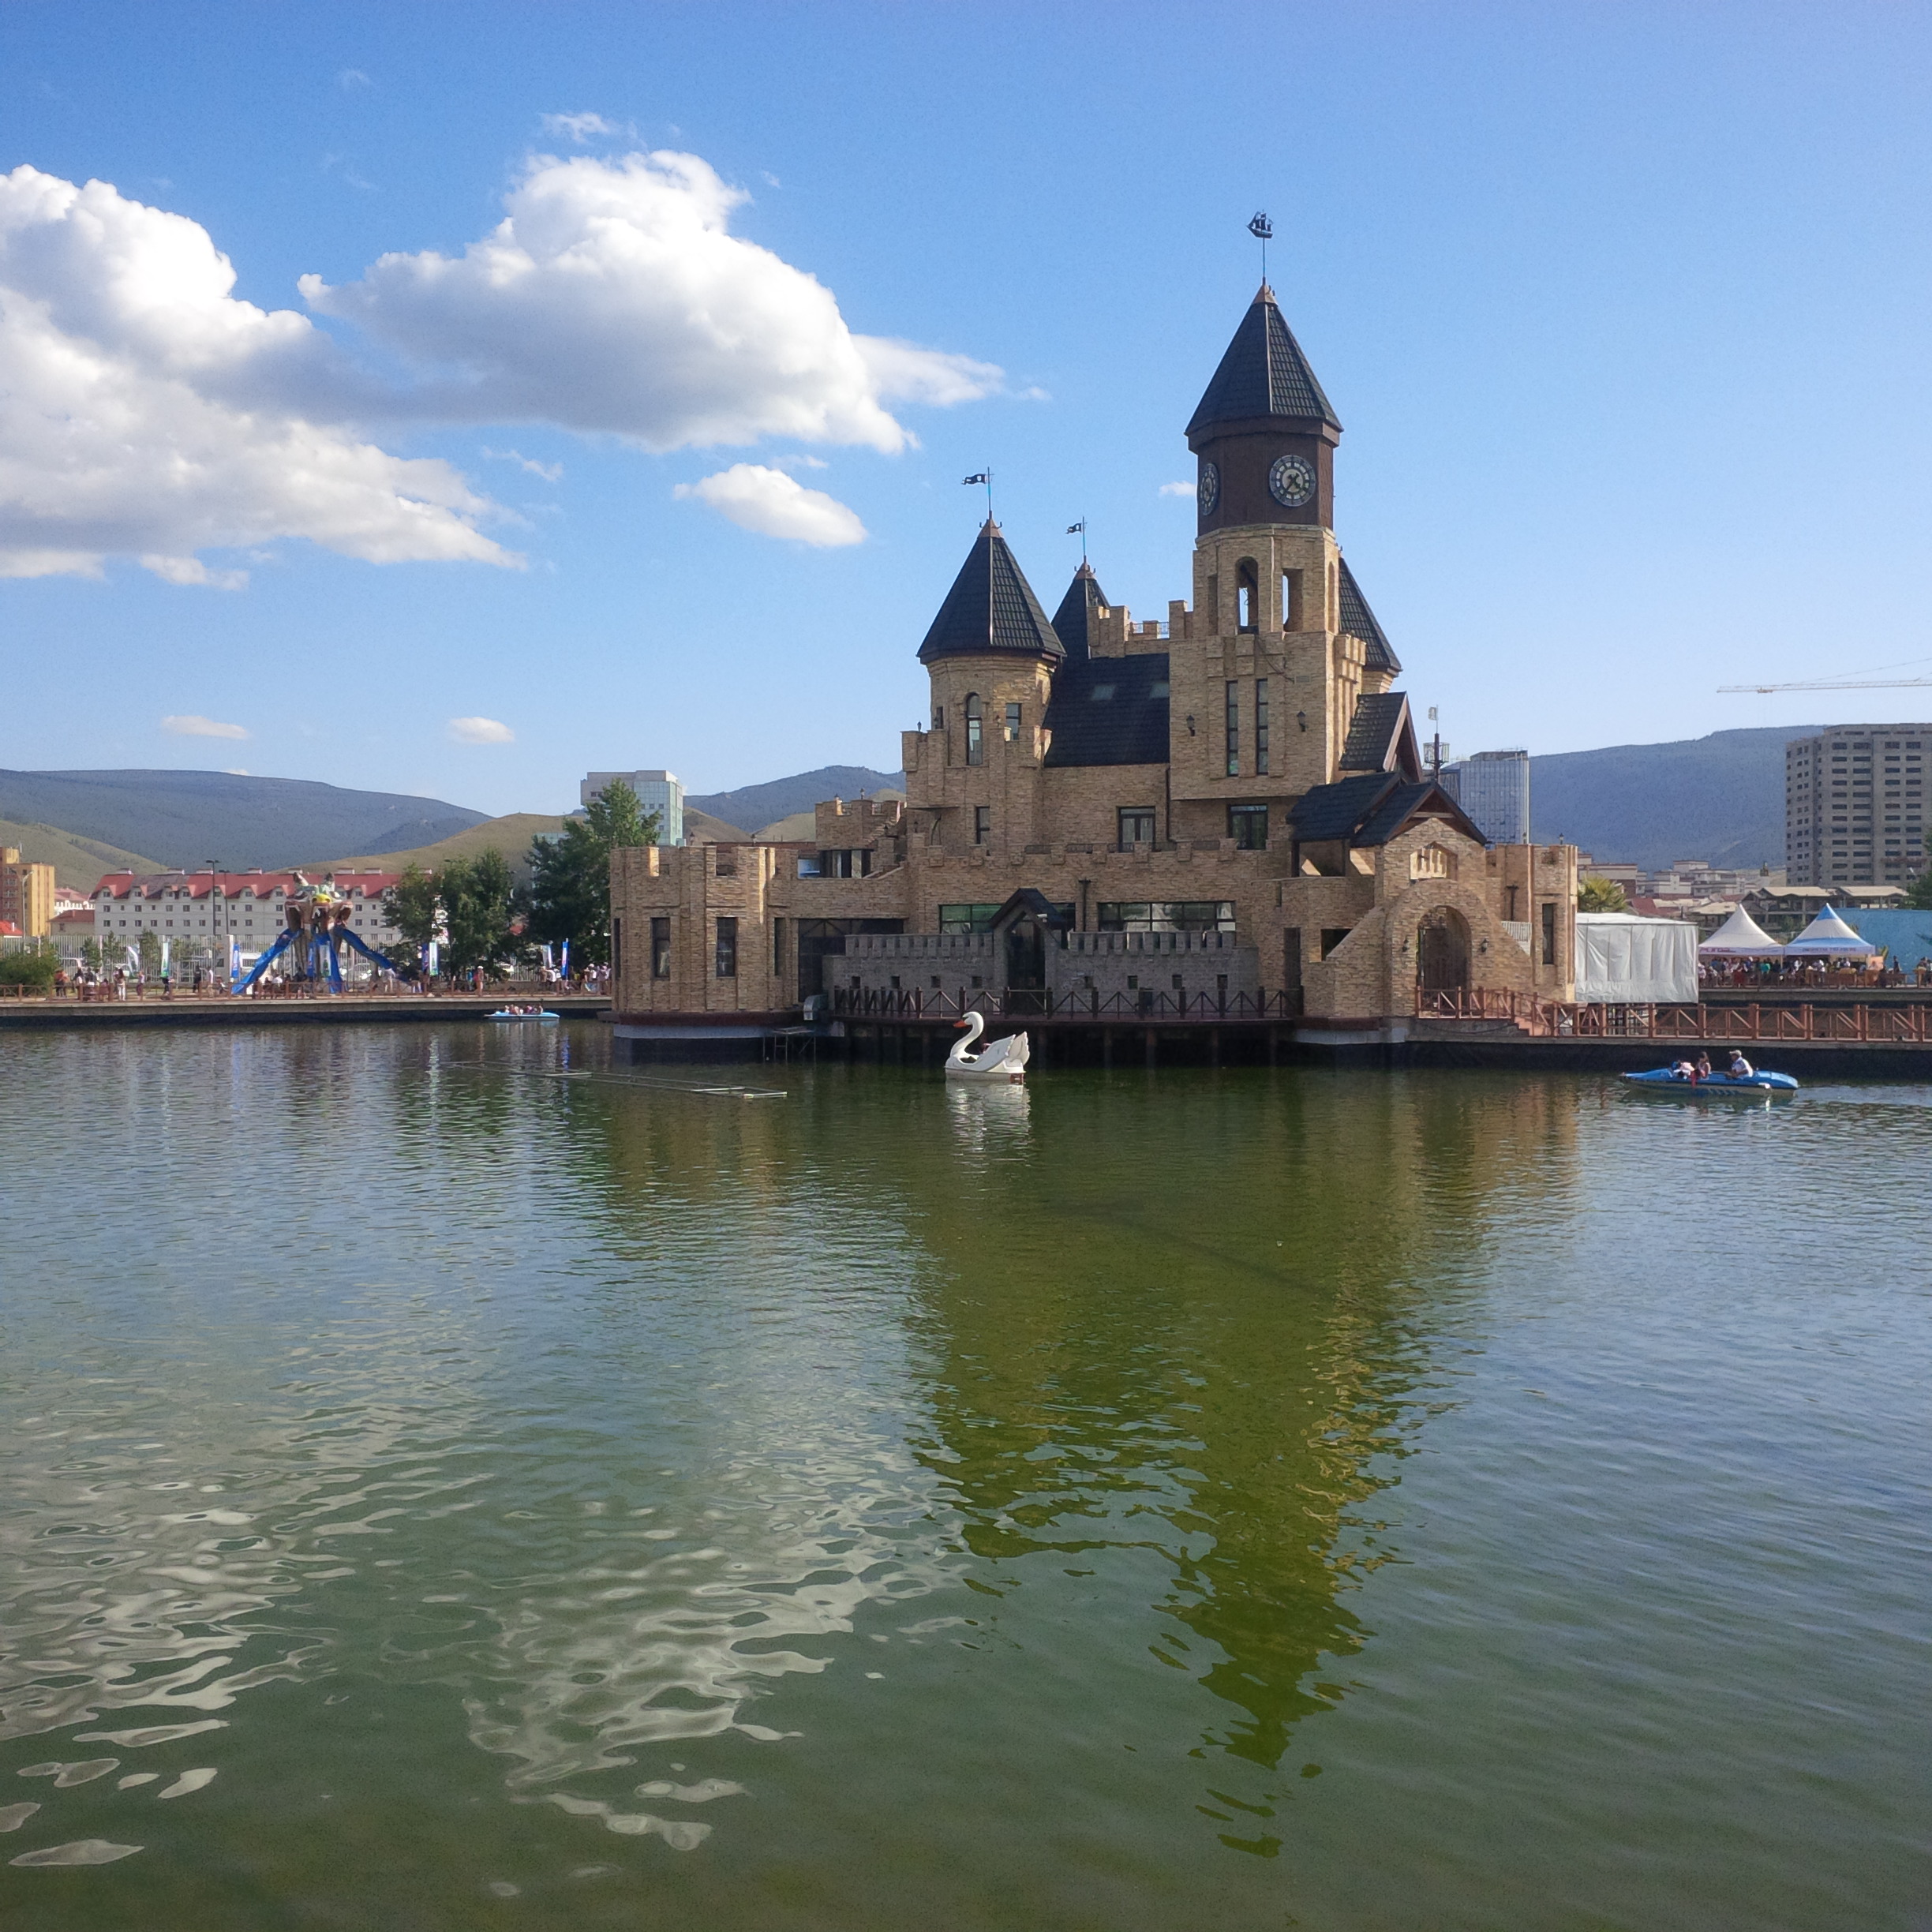 a castle with a clock tower on the water